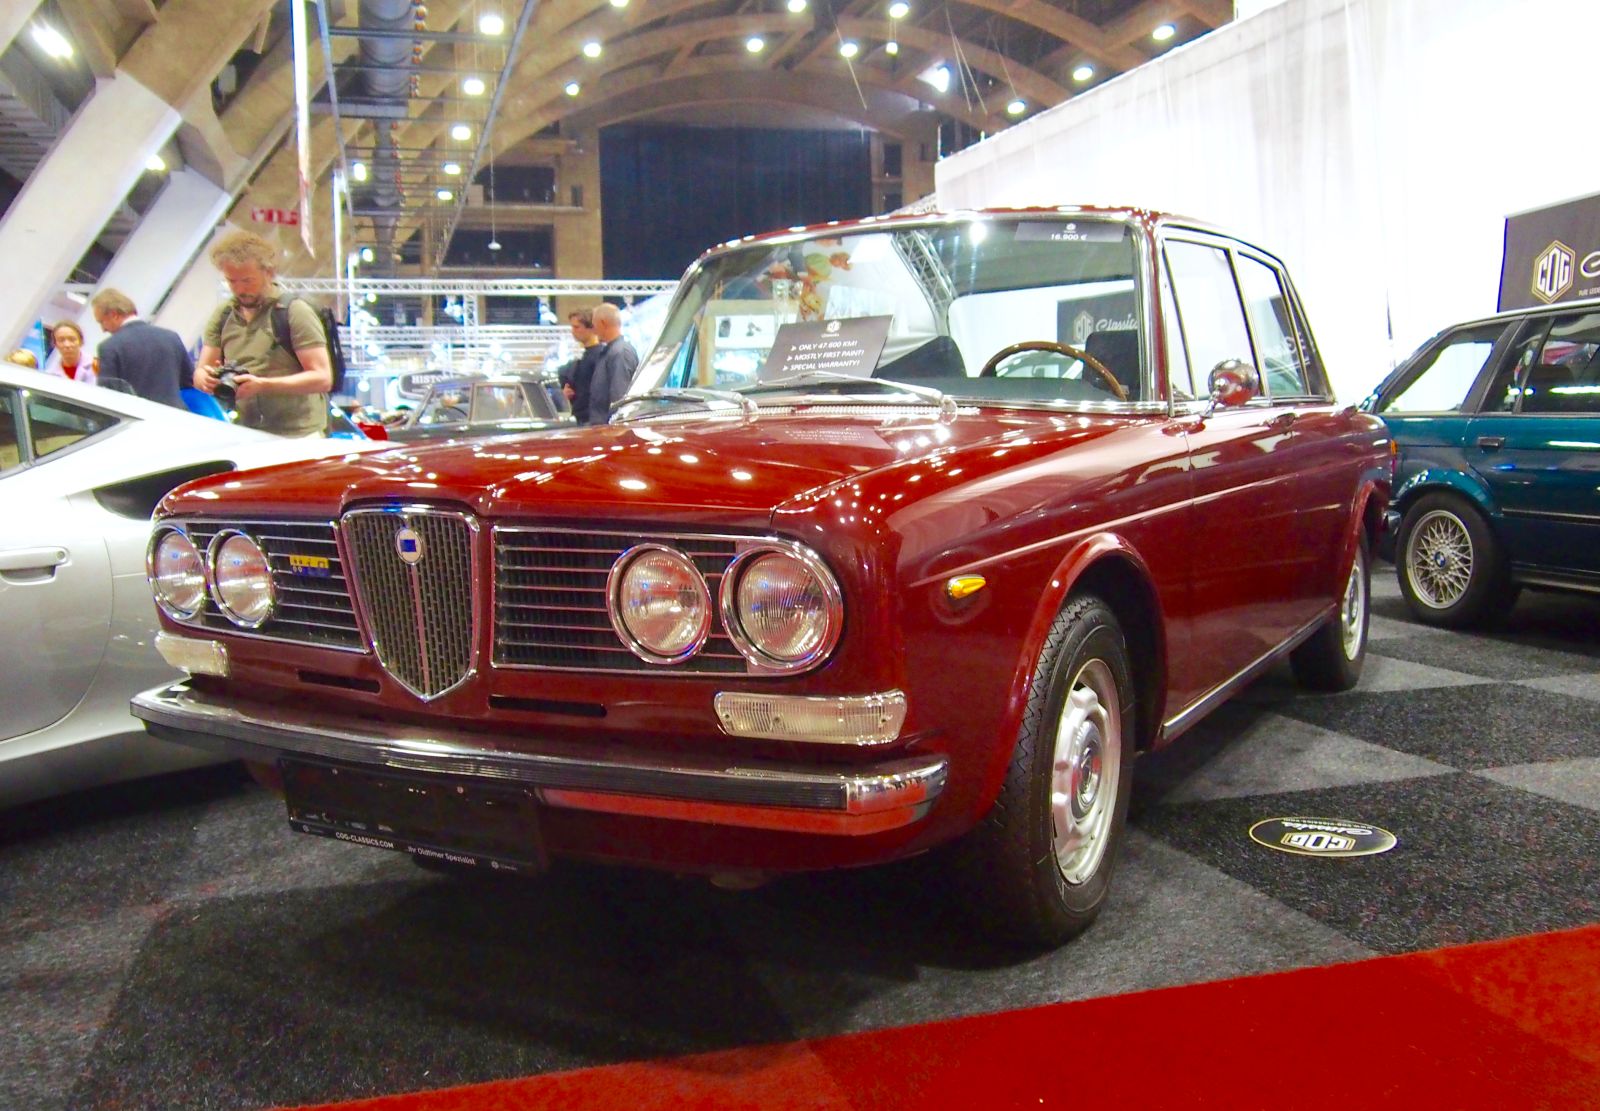 1972 Lancia 2000 Berlina. This car looks like it was built 10 years earlier. It is pretty, though.